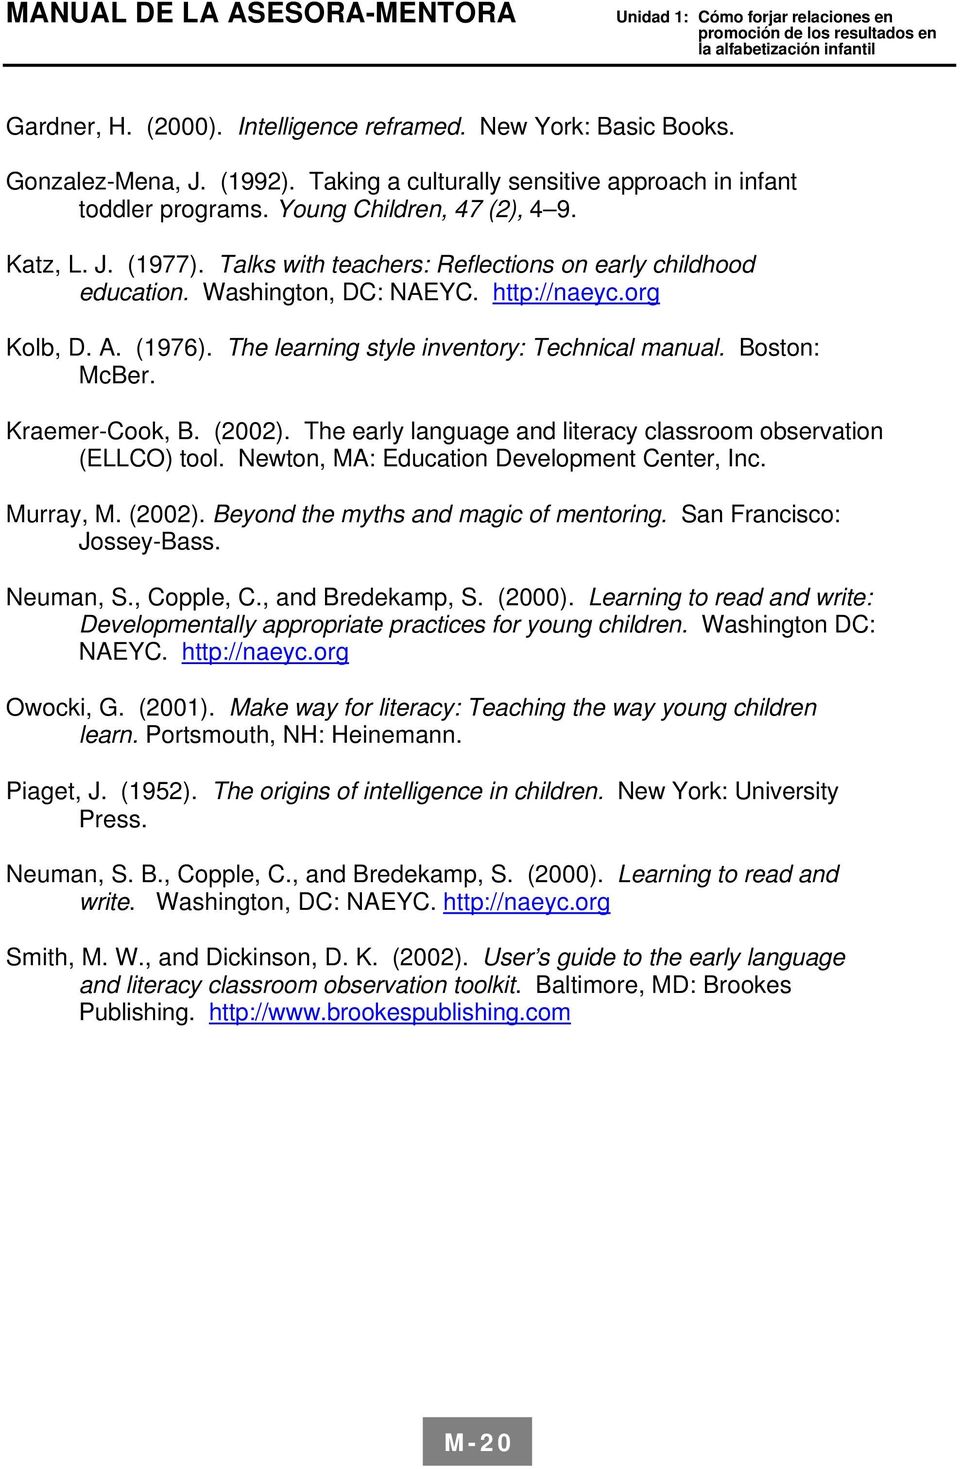 Kraemer-Cook, B. (2002). The early language and literacy classroom observation (ELLCO) tool. Newton, MA: Education Development Center, Inc. Murray, M. (2002). Beyond the myths and magic of mentoring.